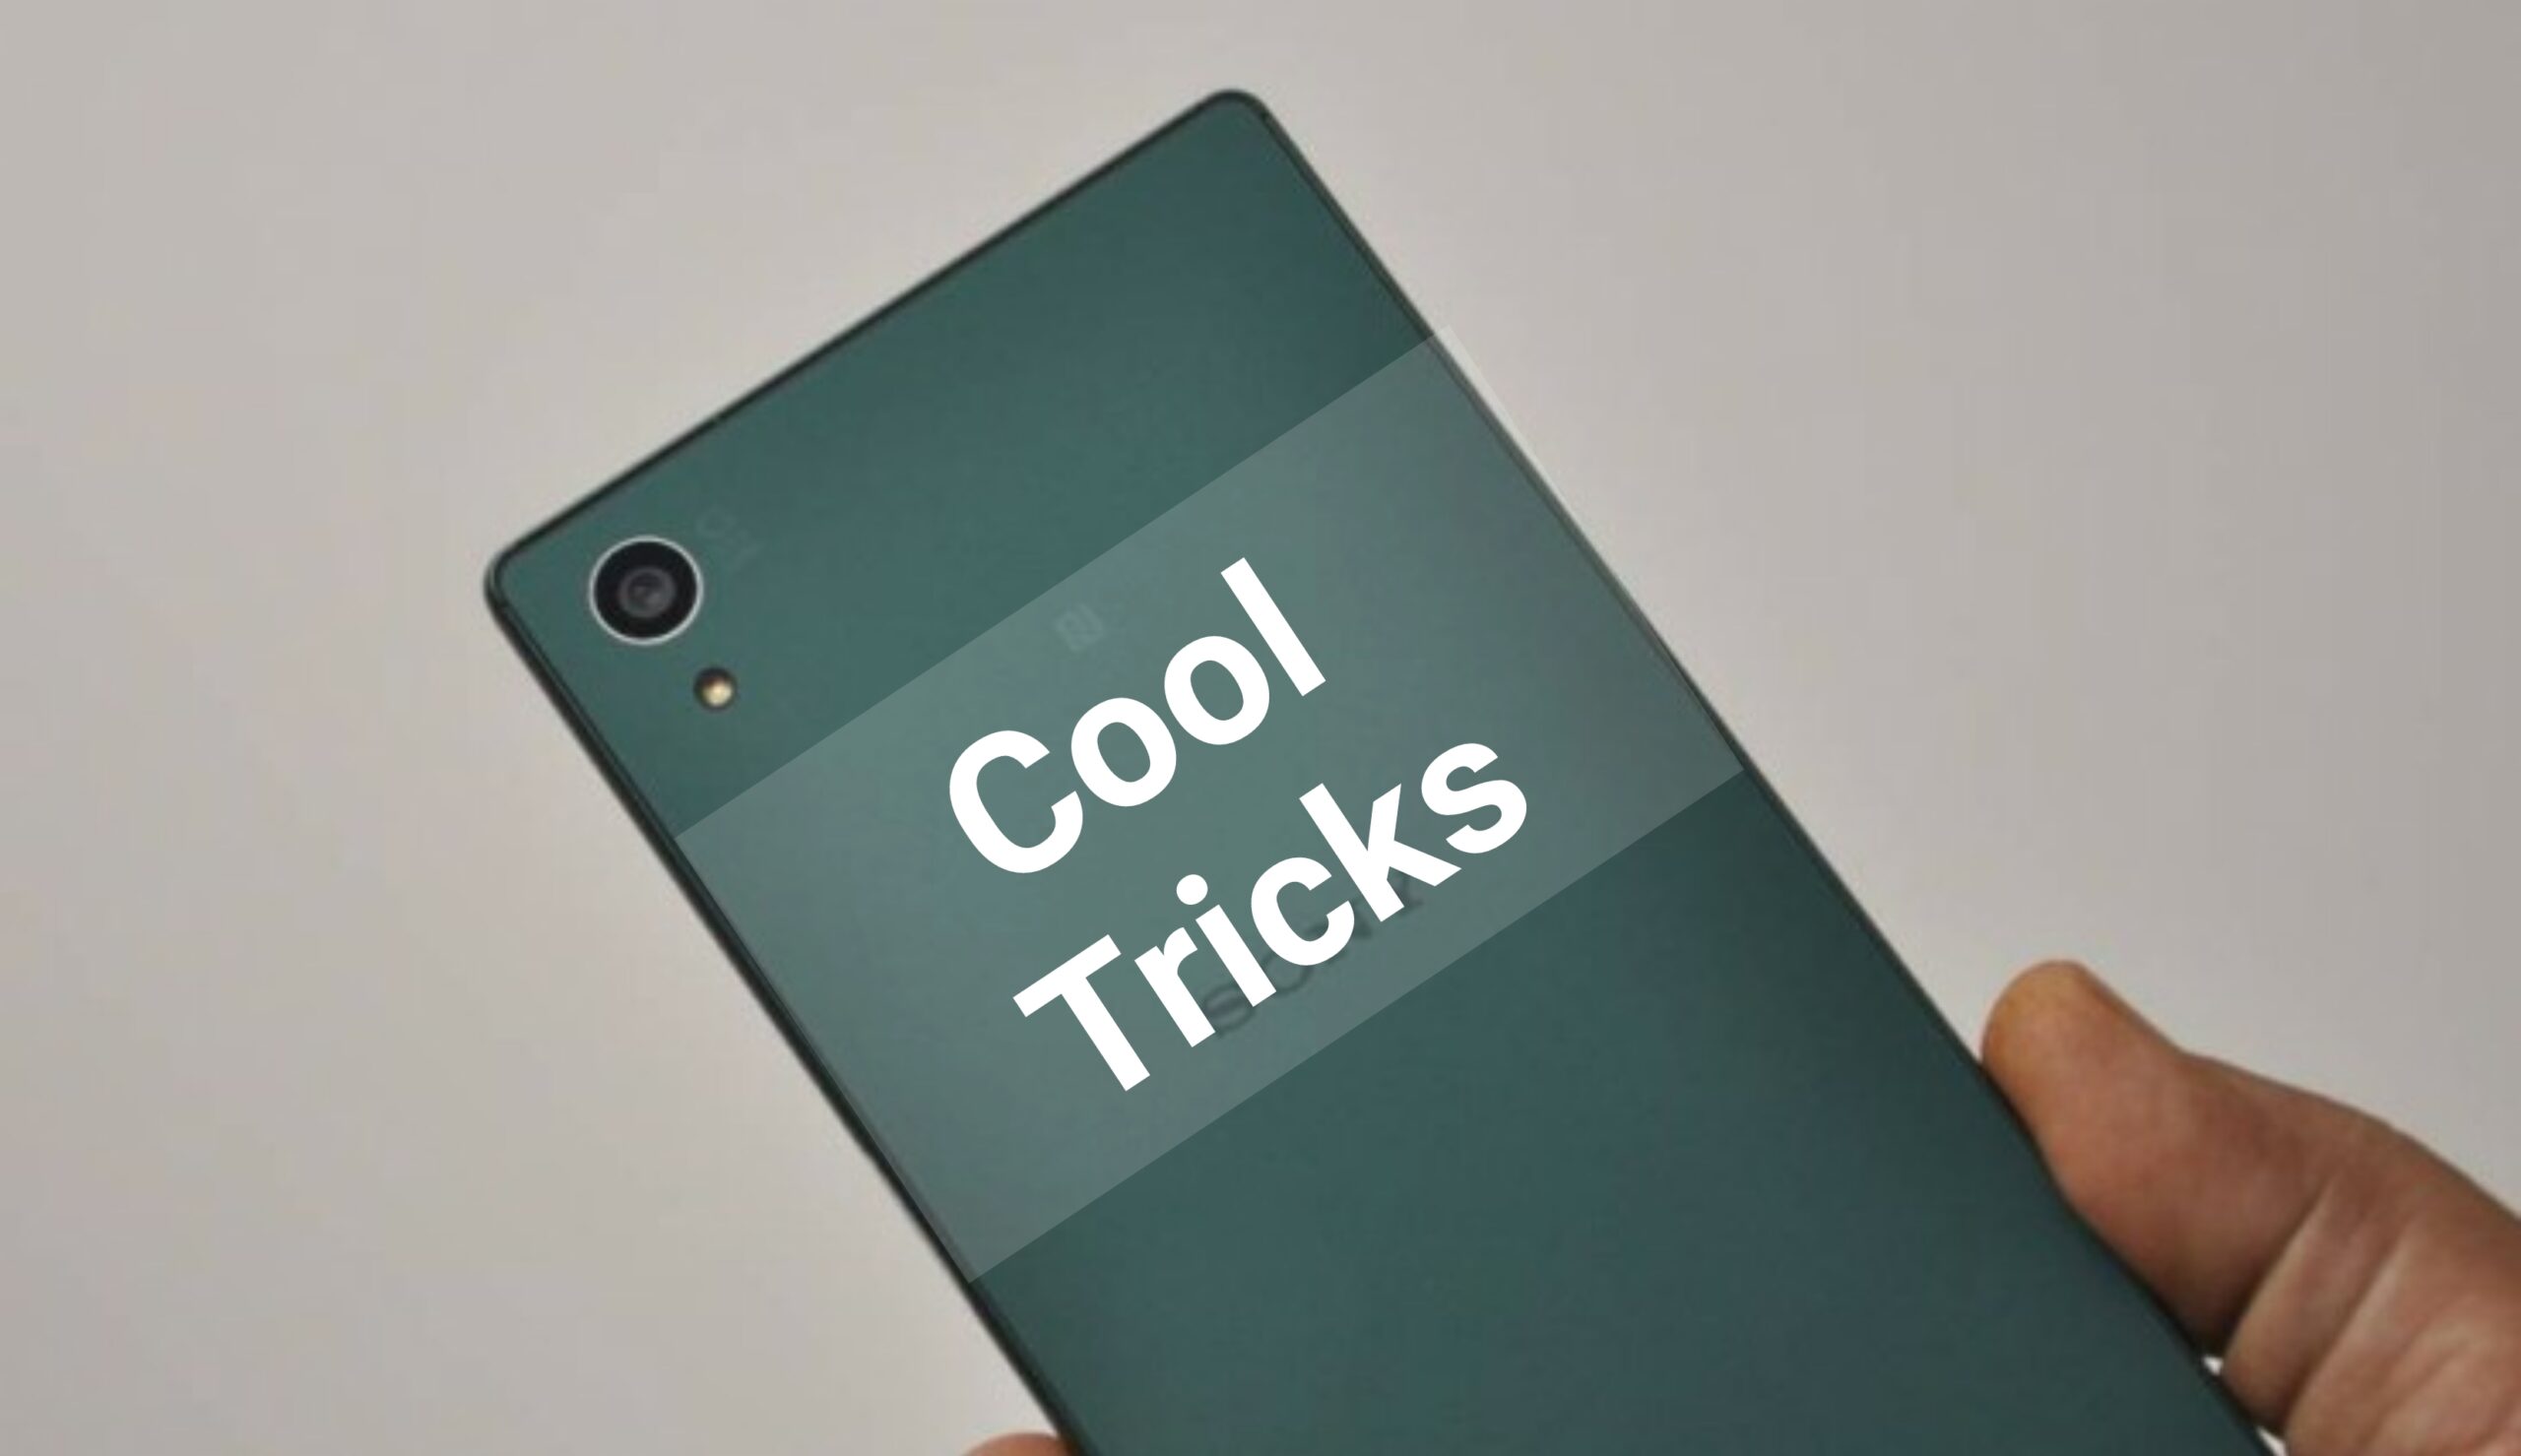 7 Cool Tricks you can do with your smartphone